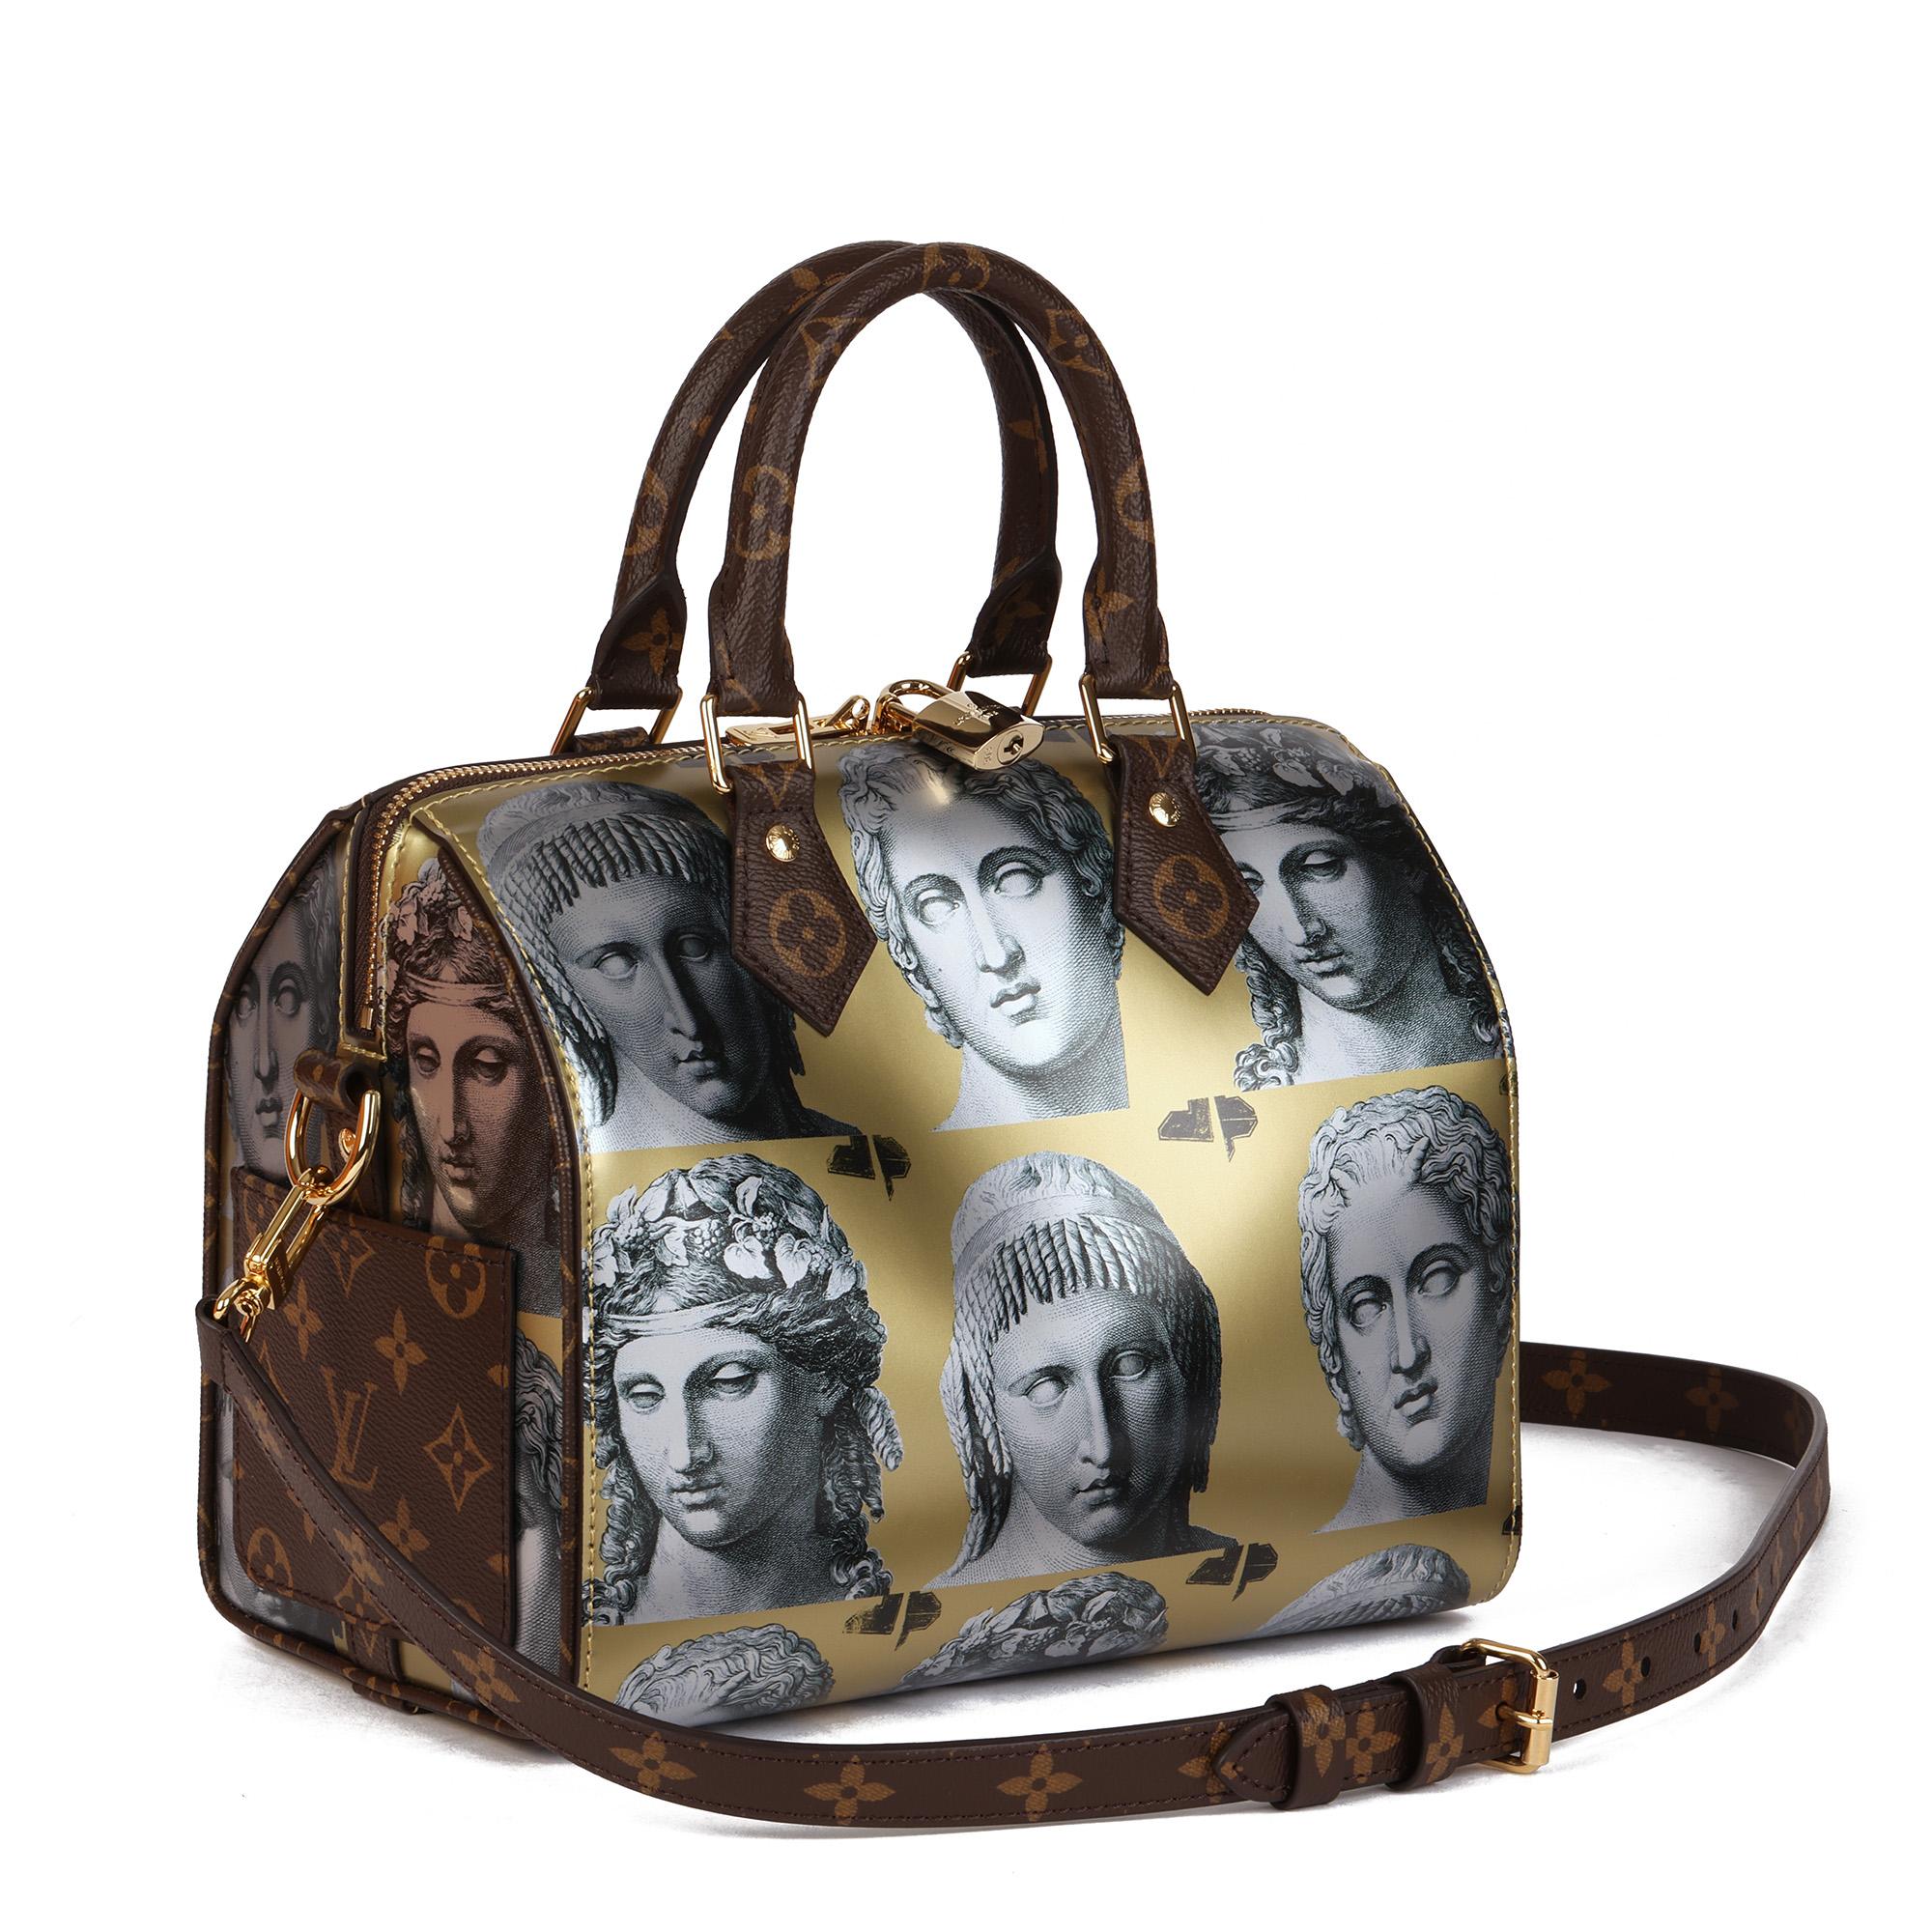 LOUIS VUITTON
Gold Metallic Leather & Brown Monogram Coated Canvas Fornasetti Speedy 25 Bandouliere

Xupes Reference: HB4431
Serial Number: X
Age (Circa): 2021
Accompanied By: Louis Vuitton Dust Bag, Box, Shoulder Strap, Padlock, Keys
Authenticity